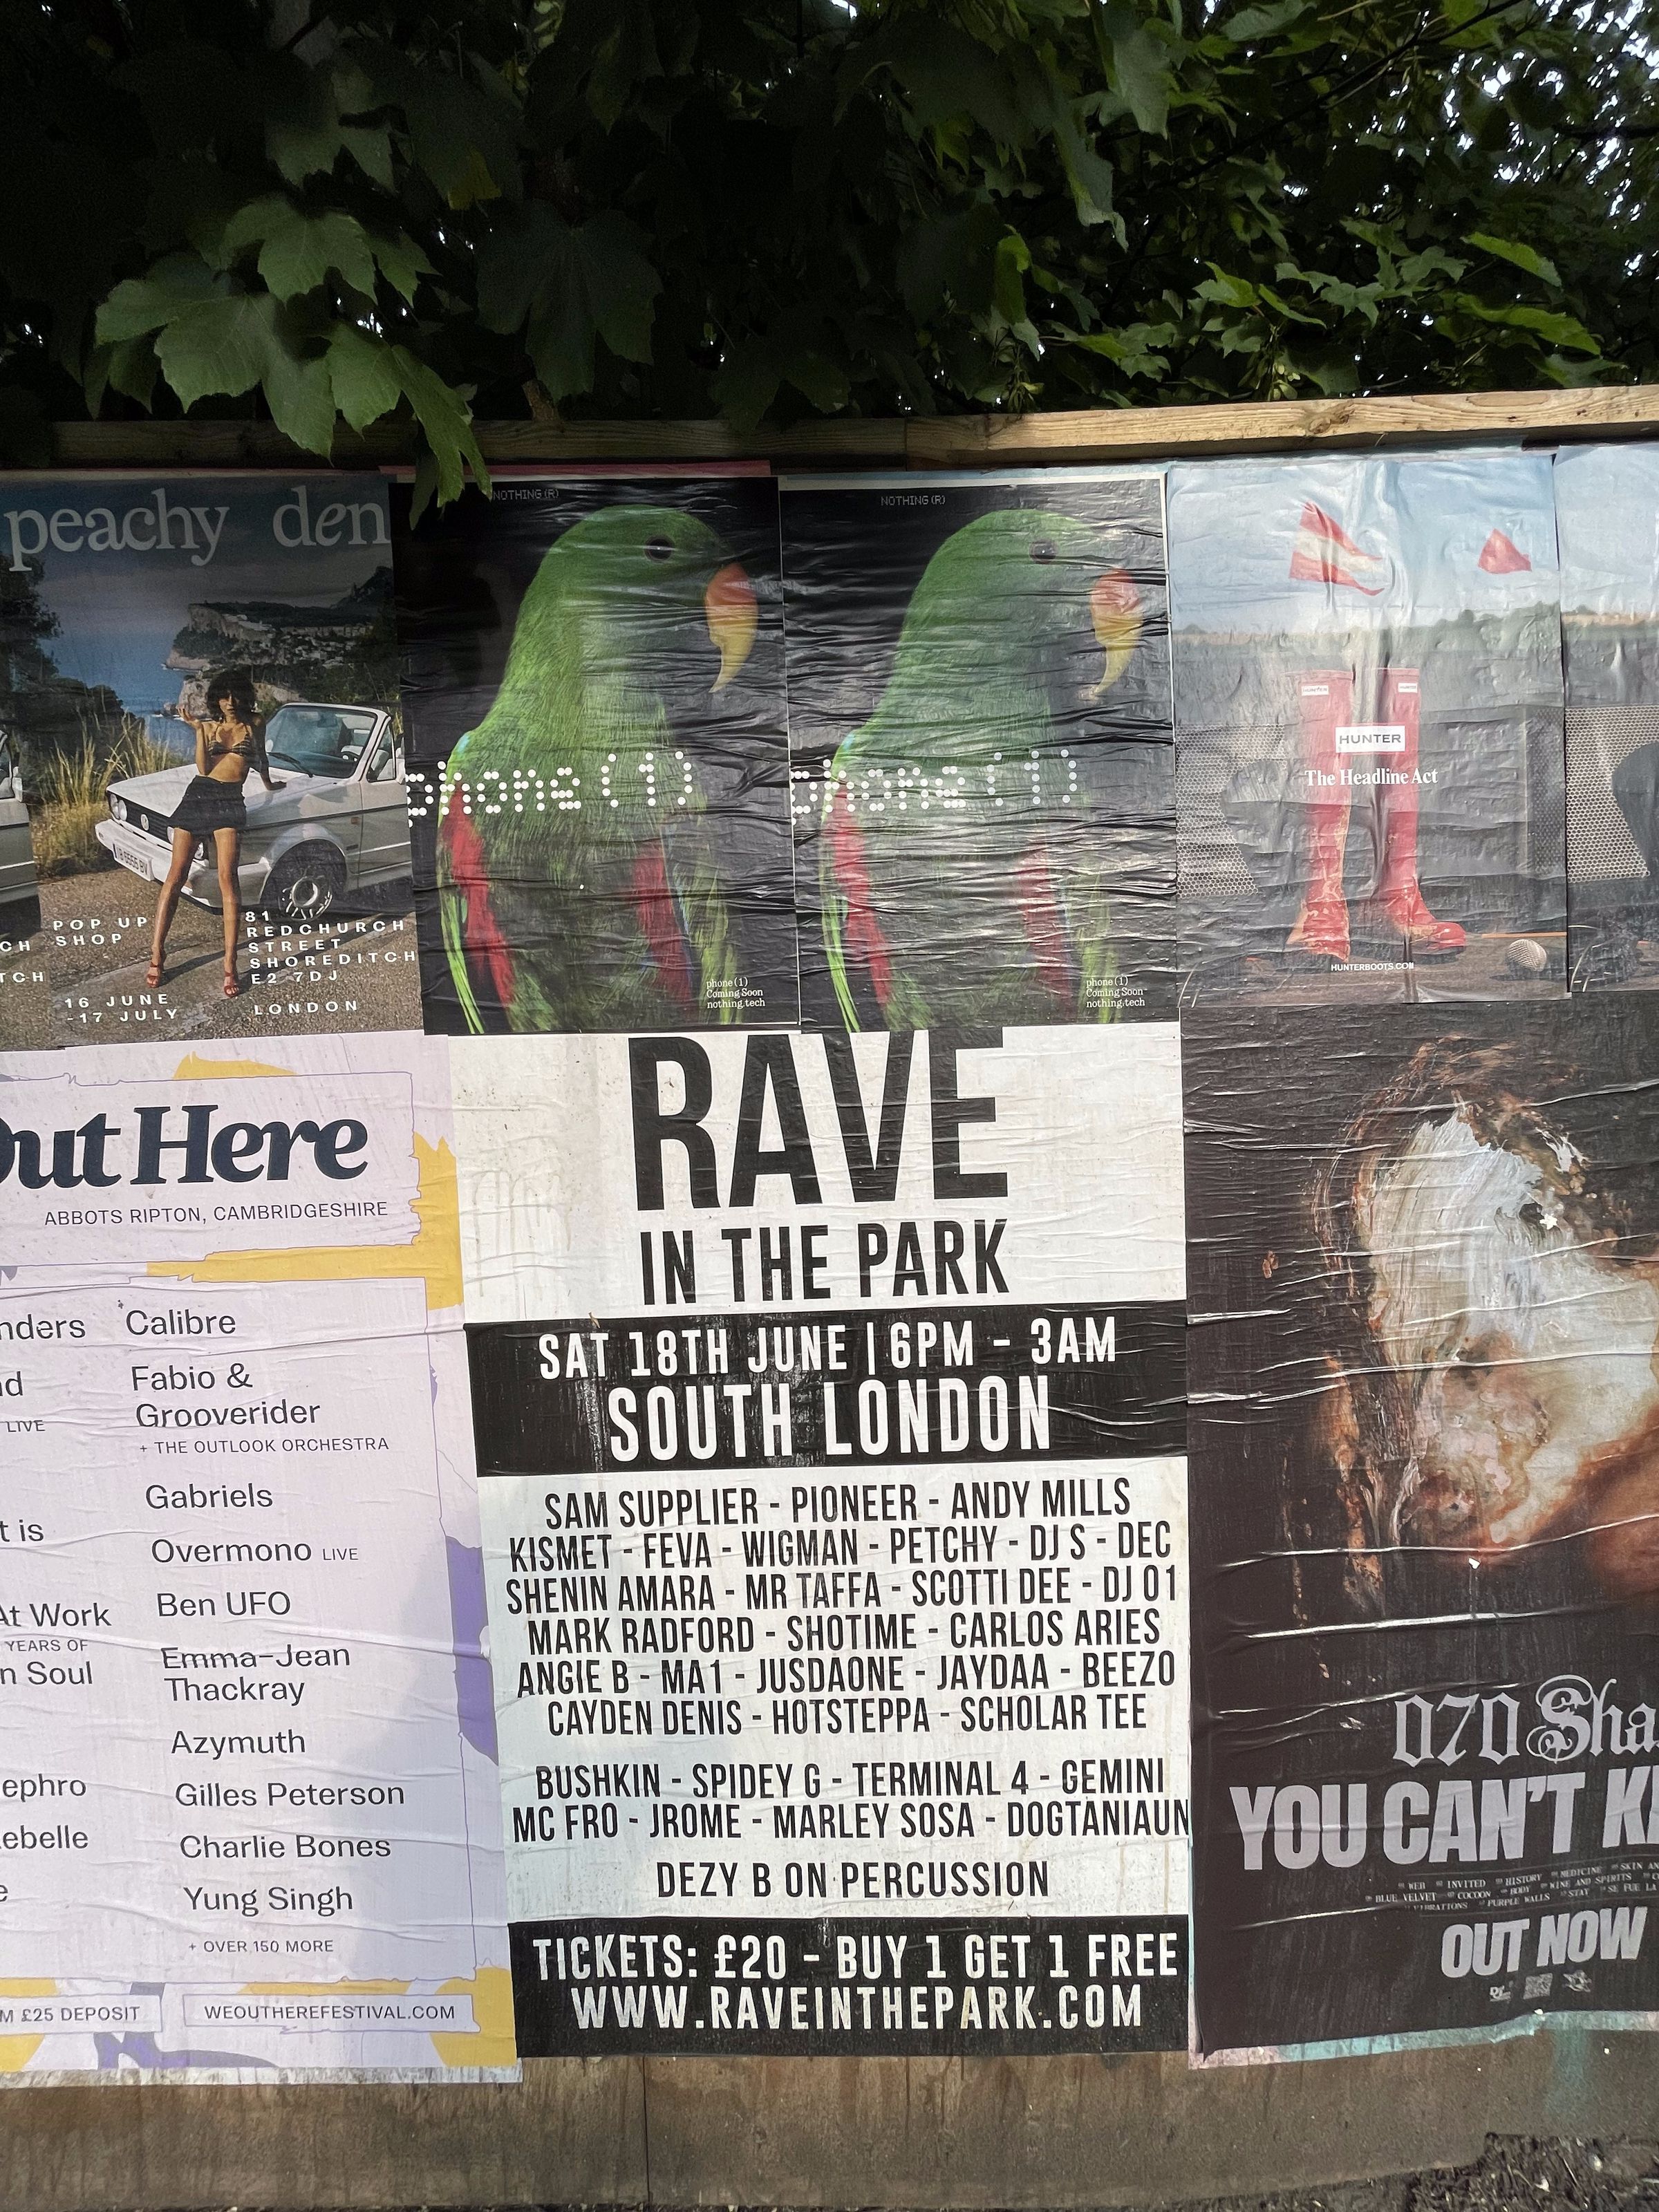 Posters advertising Nothing’s event, as seen in south London